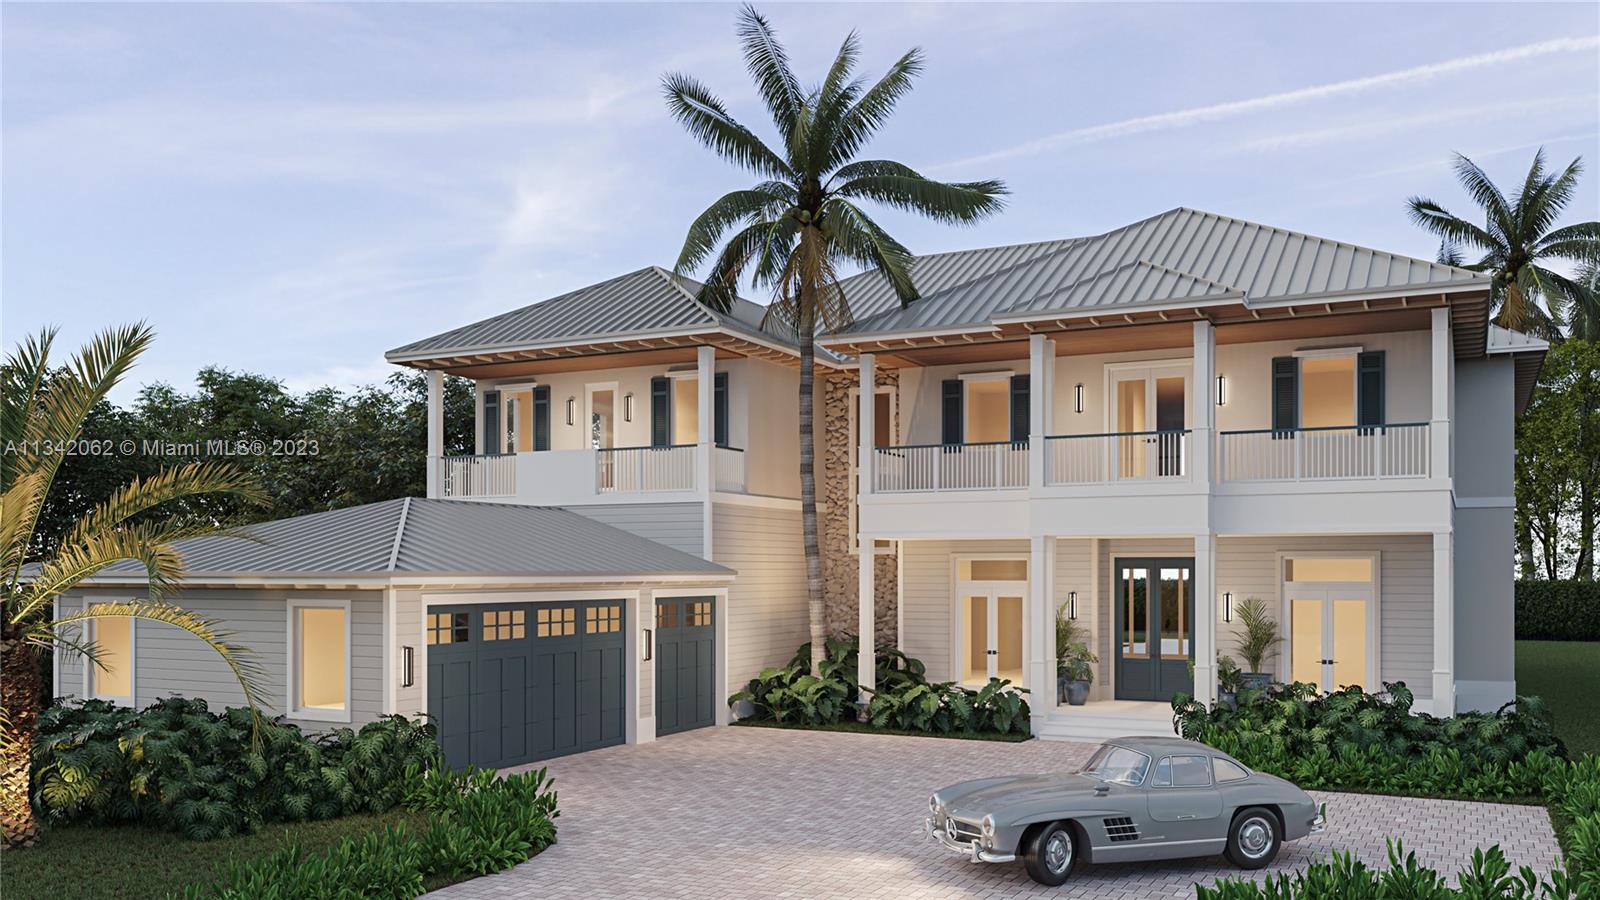 A rare opportunity to customize your luxurious  Florida coastal  home in coveted Ponce Davis with award winning Hollub Group.Tucked behind a stately privacy wall, the stunning architecture, unparalleled finishes and outstanding floor plan  w/ 6 bedrooms, 6 baths, 3 garages, including gym/flex room & bar, custom kitchen w/ Wolf & Sub-Zero, loft & additional 1/1 poolside guest house is designed for effortless entertaining and relaxation. All en suite bedrooms, tremendous primary bedroom, upstairs kitchenette & laundry, elevator, generator. Home automation and security system. Experience the best of Miami living in this coastal paradise where you can enjoy the year round sunshine, beaches and vibrant cultural scene. Completion est.:Summer 2024.